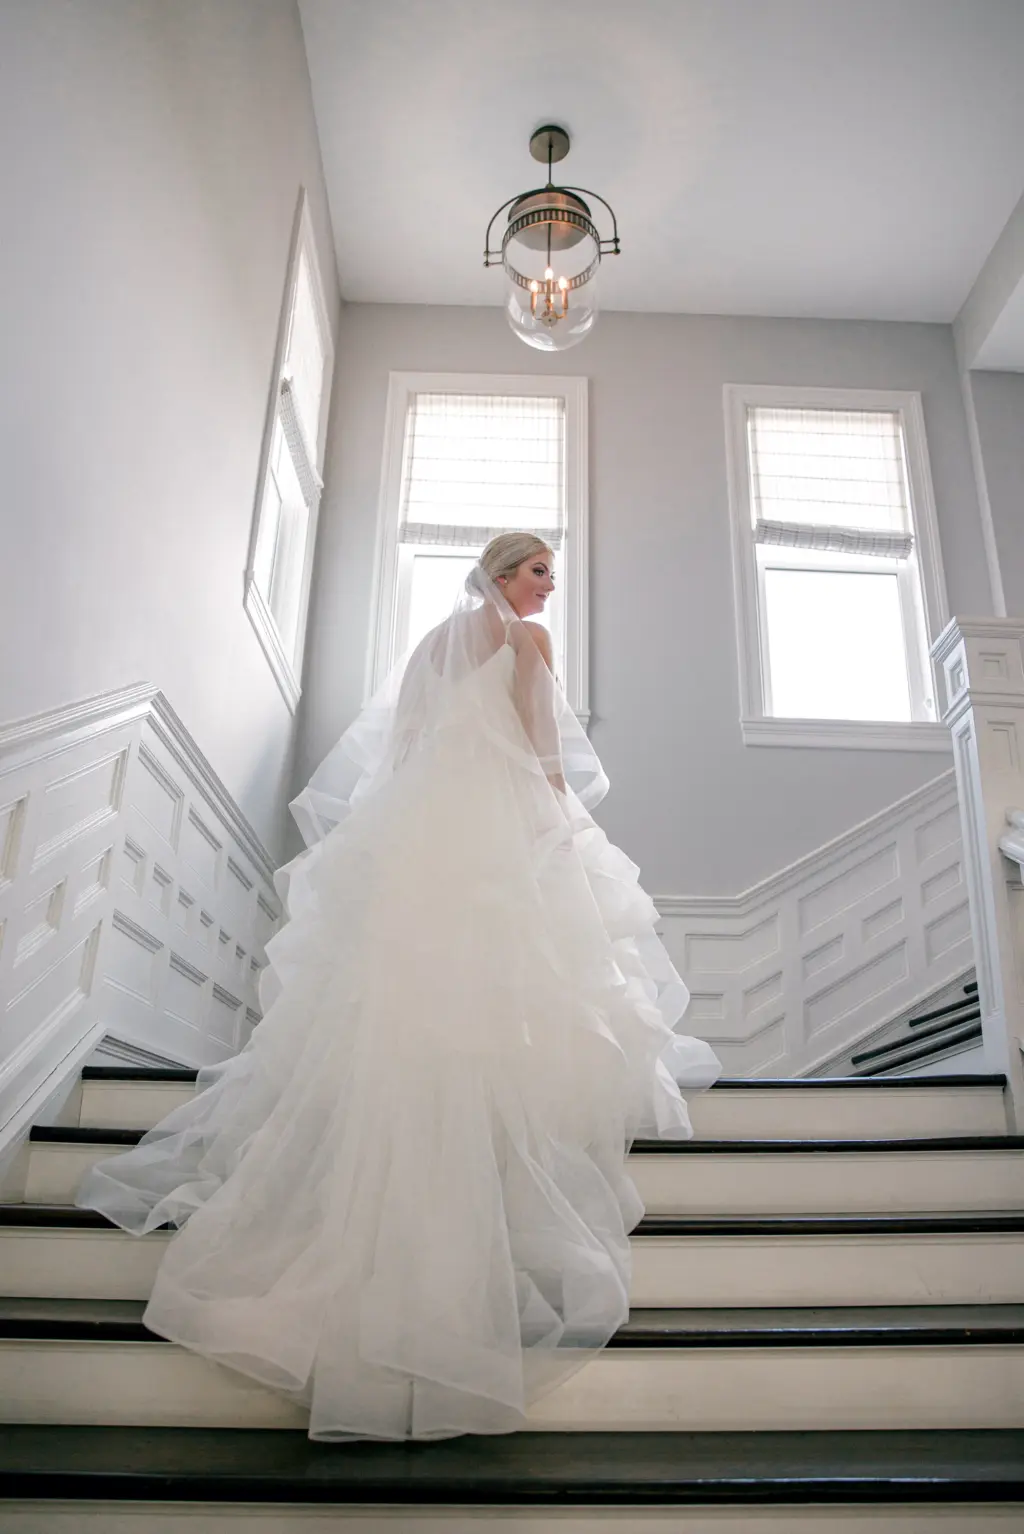 Bride Walking up the Stairs in Elegant White Tiered Tulle A-Line Sophia Tolli Wedding Dress Ideas